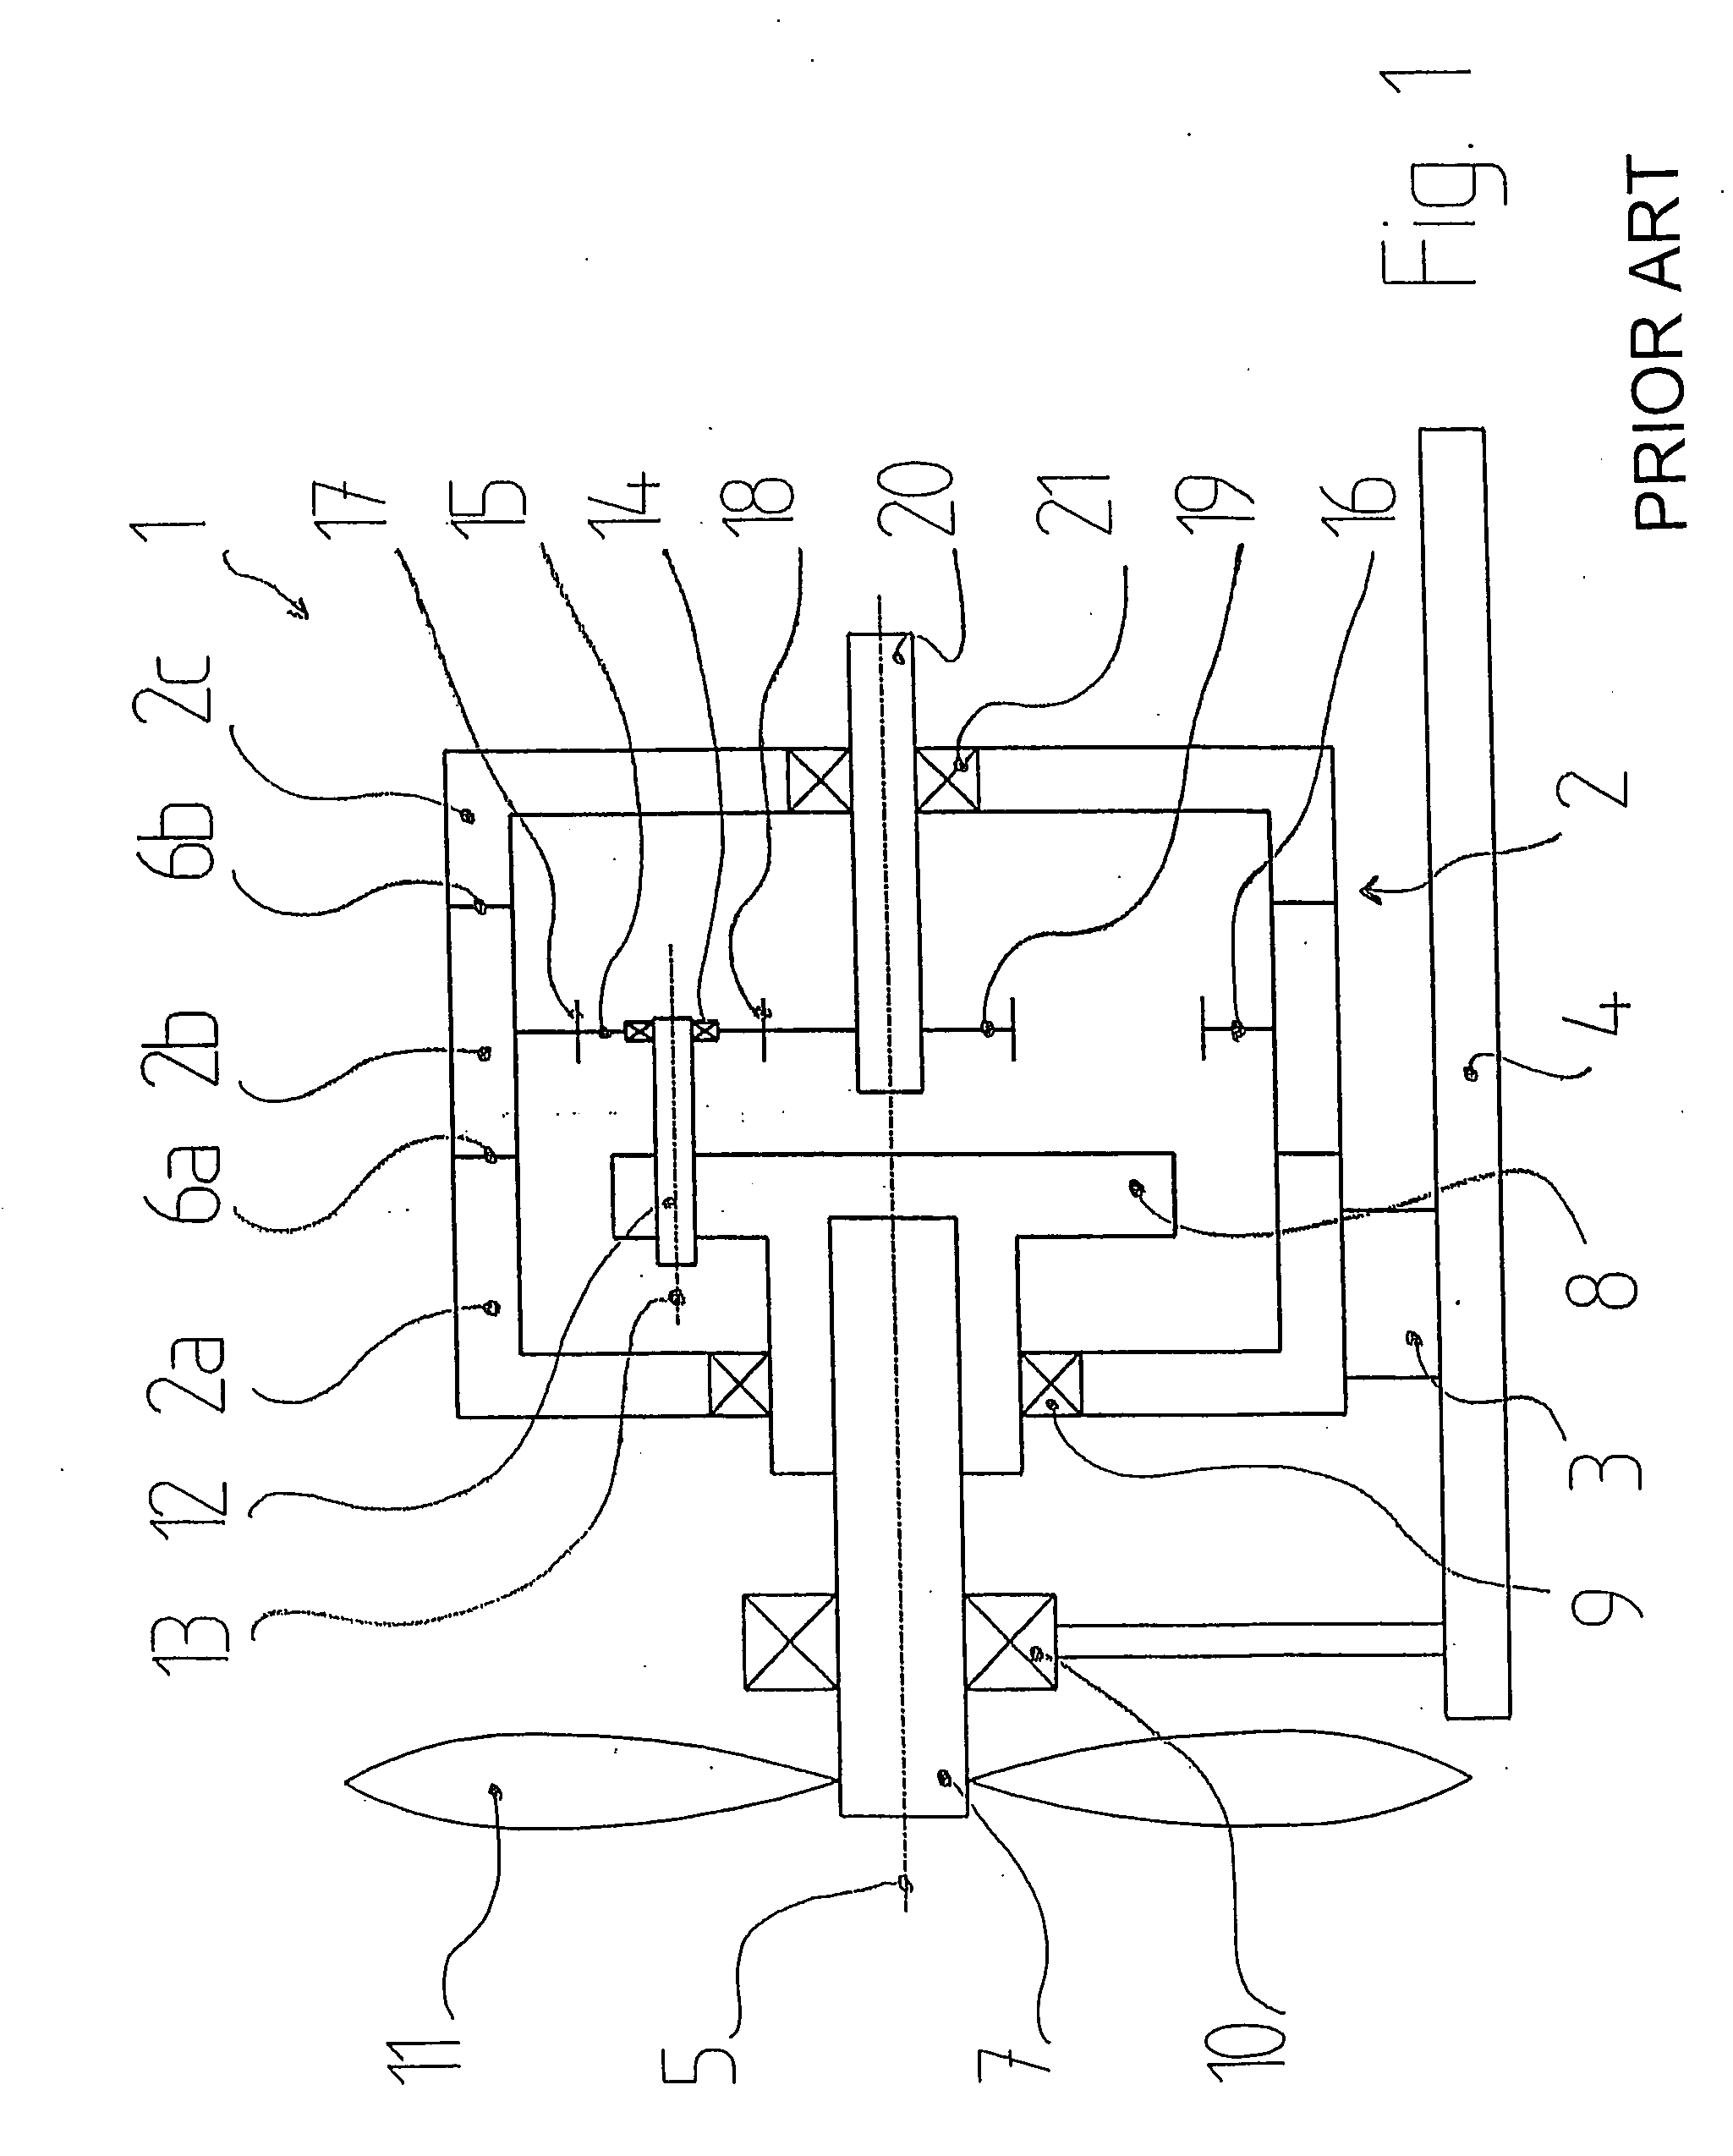 Planetary gear replacement method